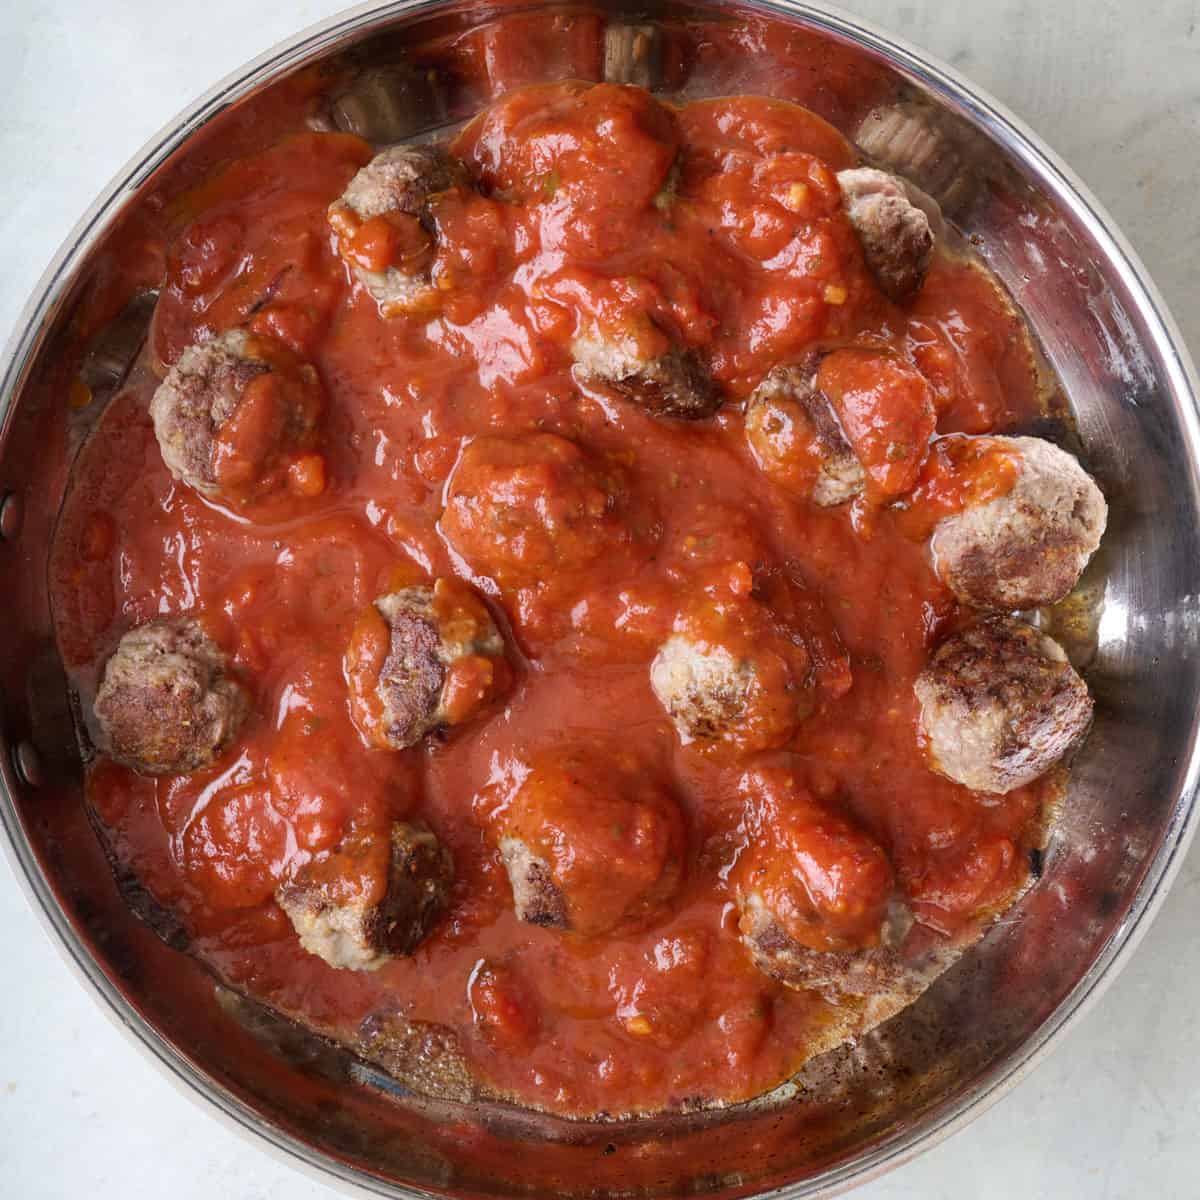 Tomato sauce added to skillet with cooked meatballs.